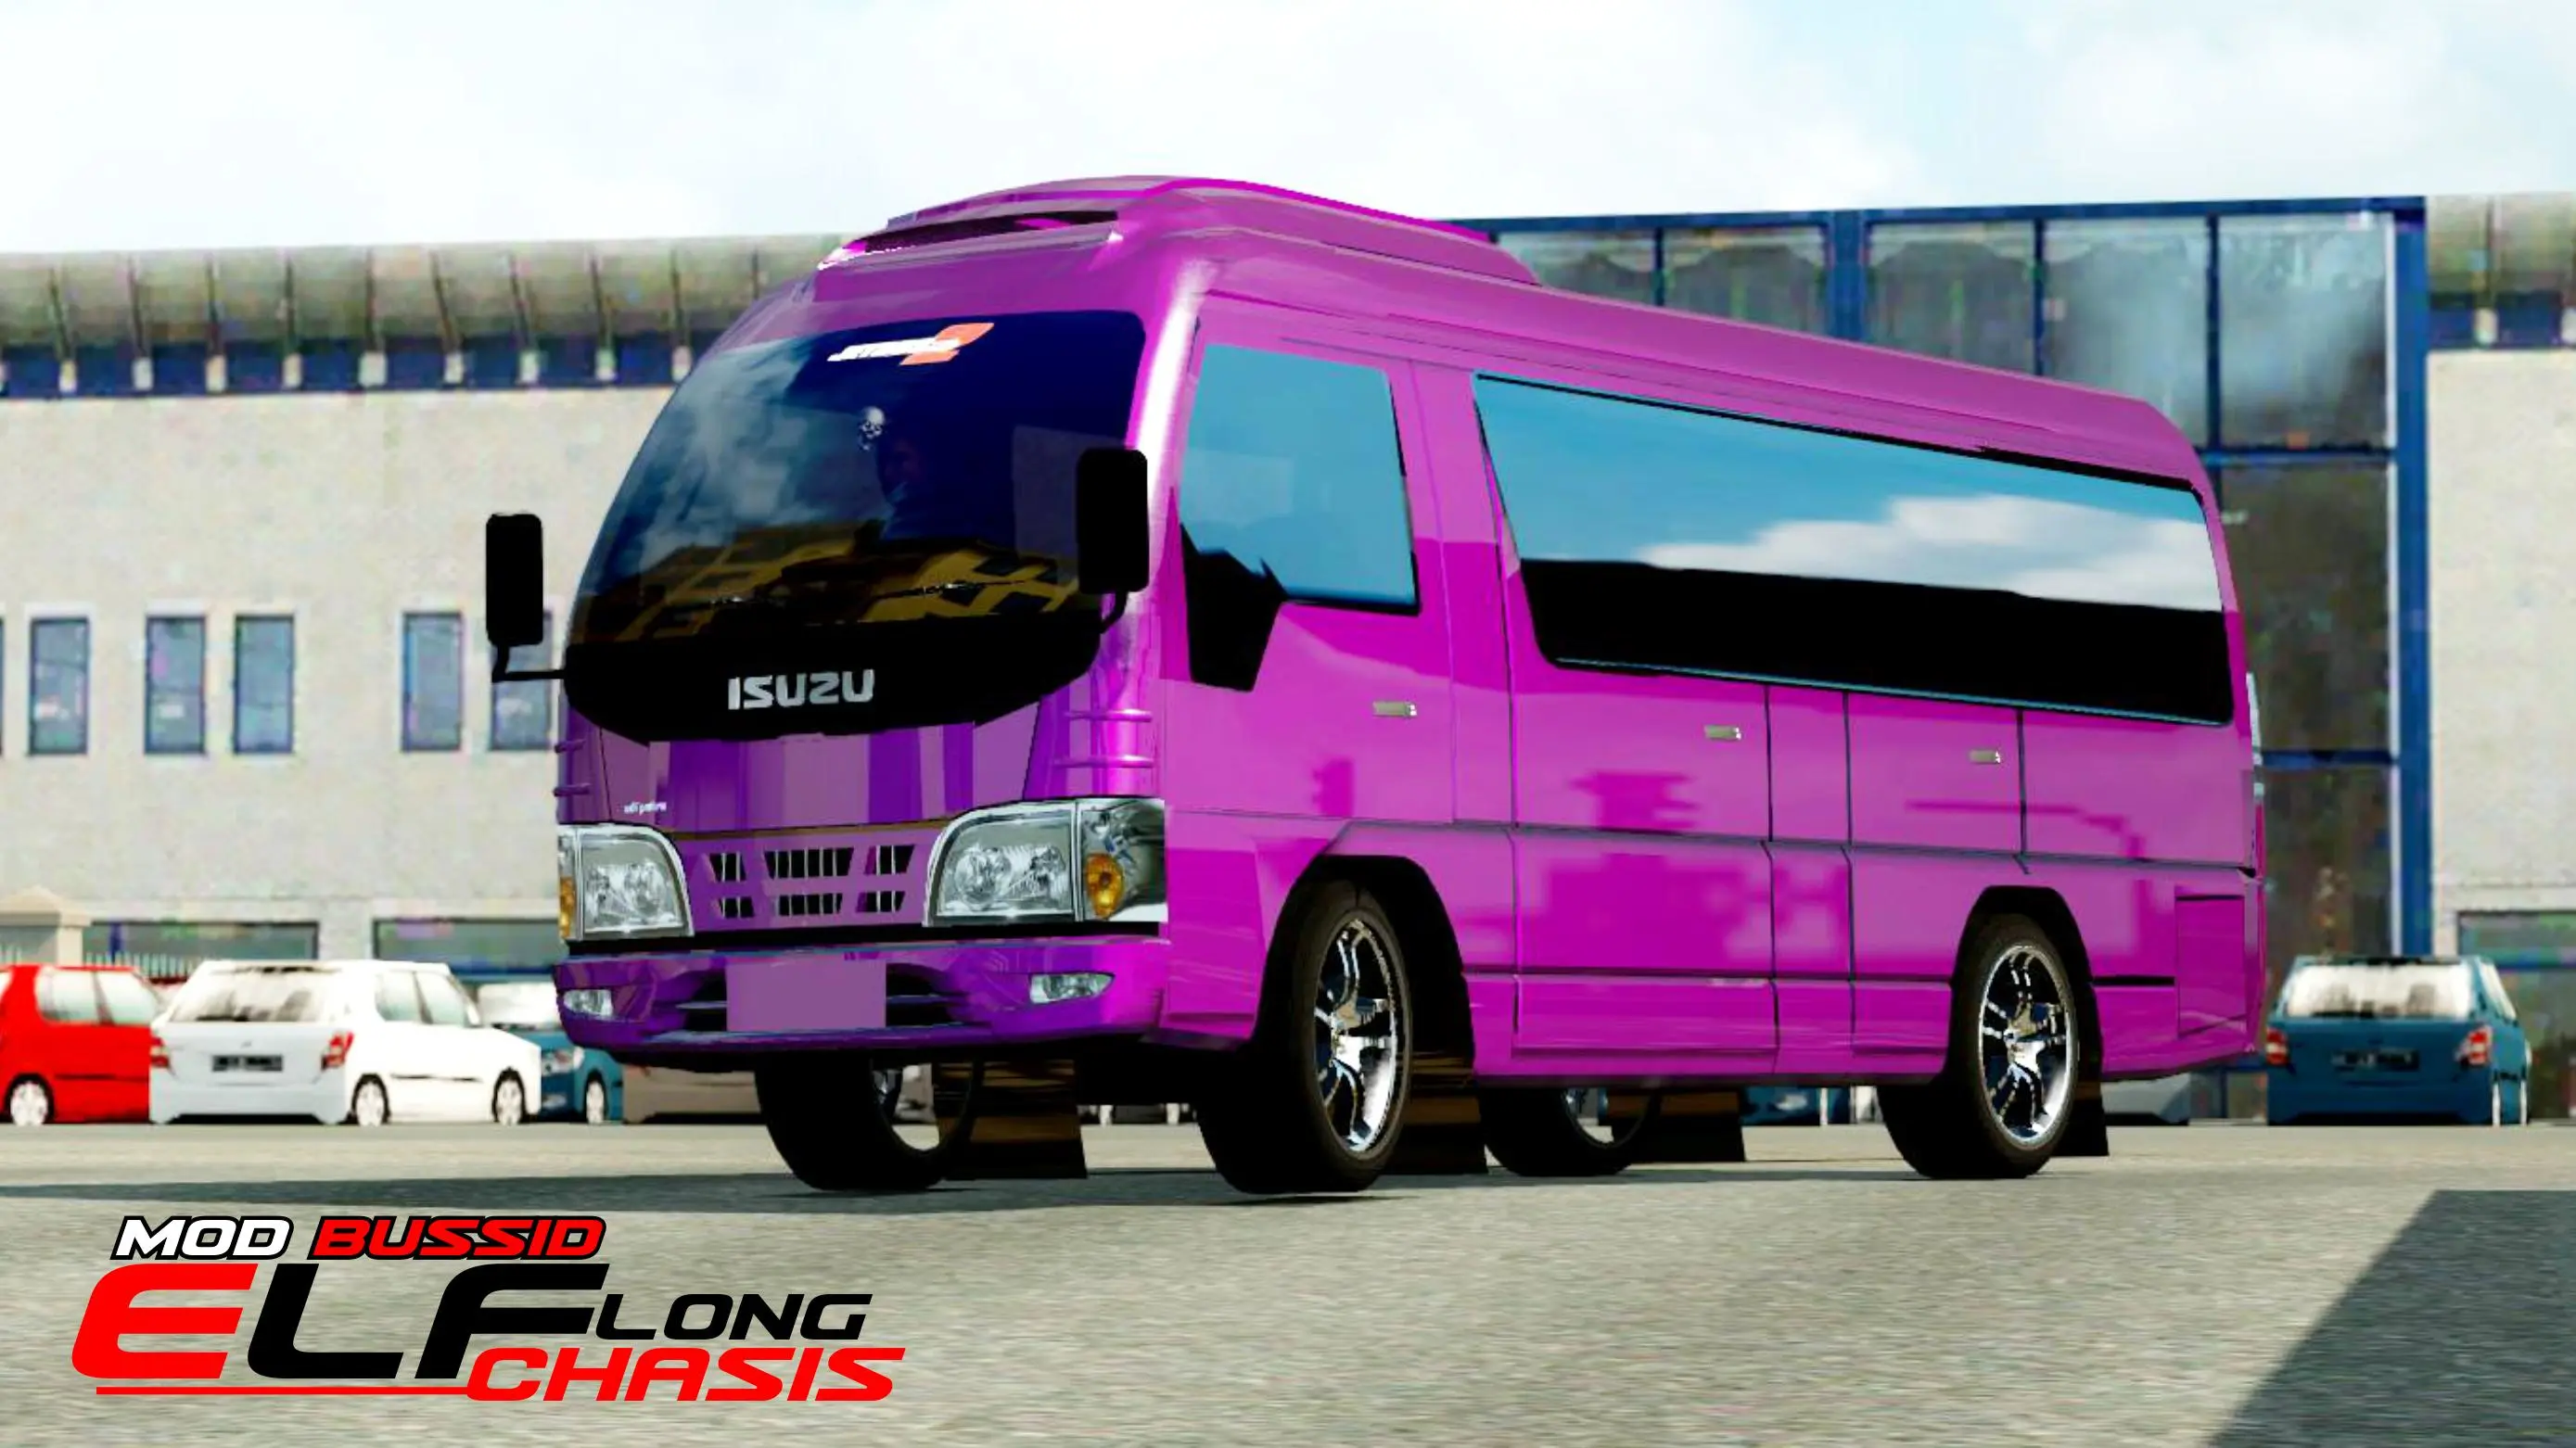 Download Mod Bussid Elf Long Chasis Android On Pc